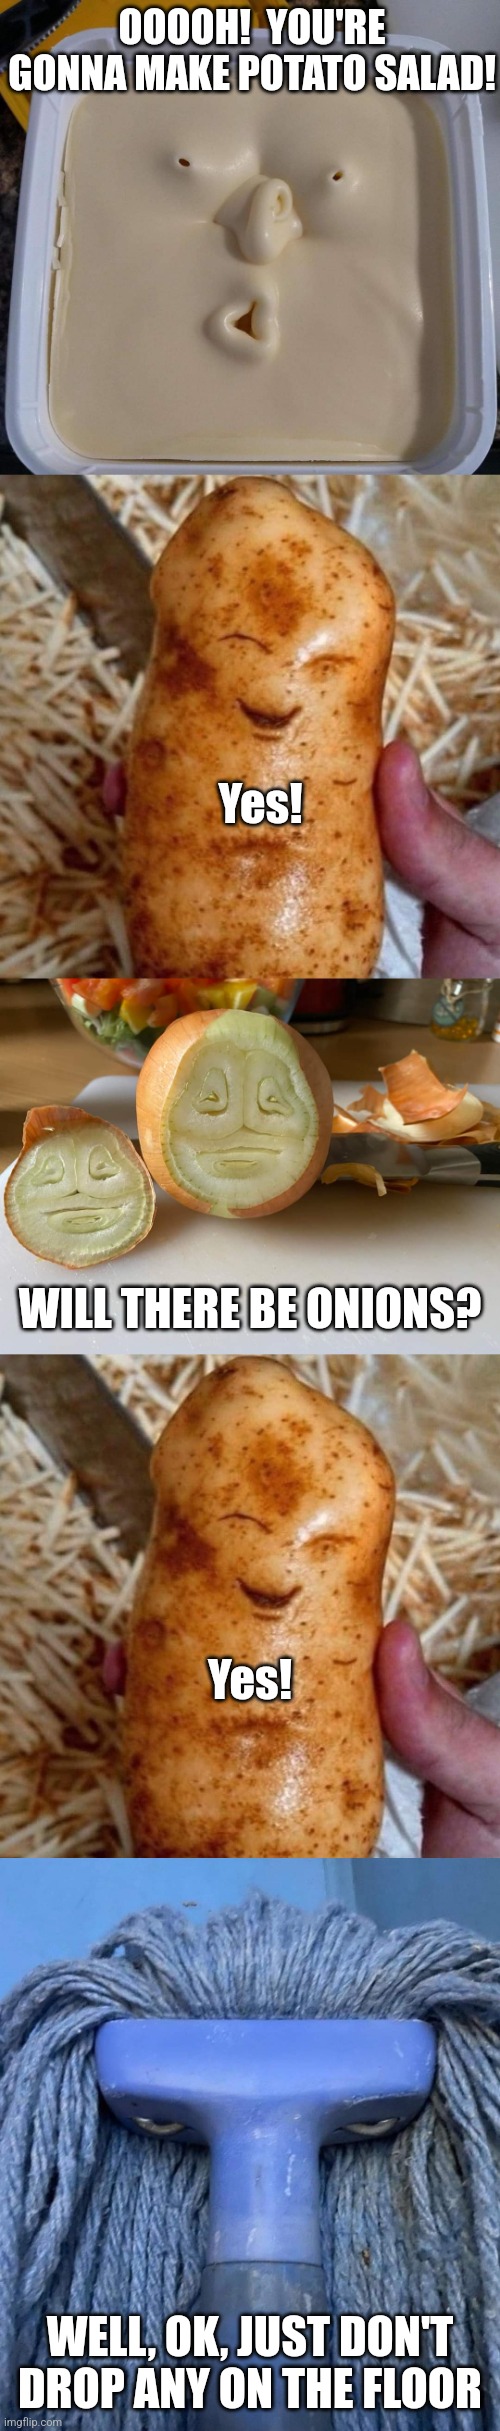 Kitchen Talk | OOOOH!  YOU'RE GONNA MAKE POTATO SALAD! Yes! WILL THERE BE ONIONS? Yes! WELL, OK, JUST DON'T DROP ANY ON THE FLOOR | image tagged in pudding,potatoes,onions,mops,kitchen,funny memes | made w/ Imgflip meme maker